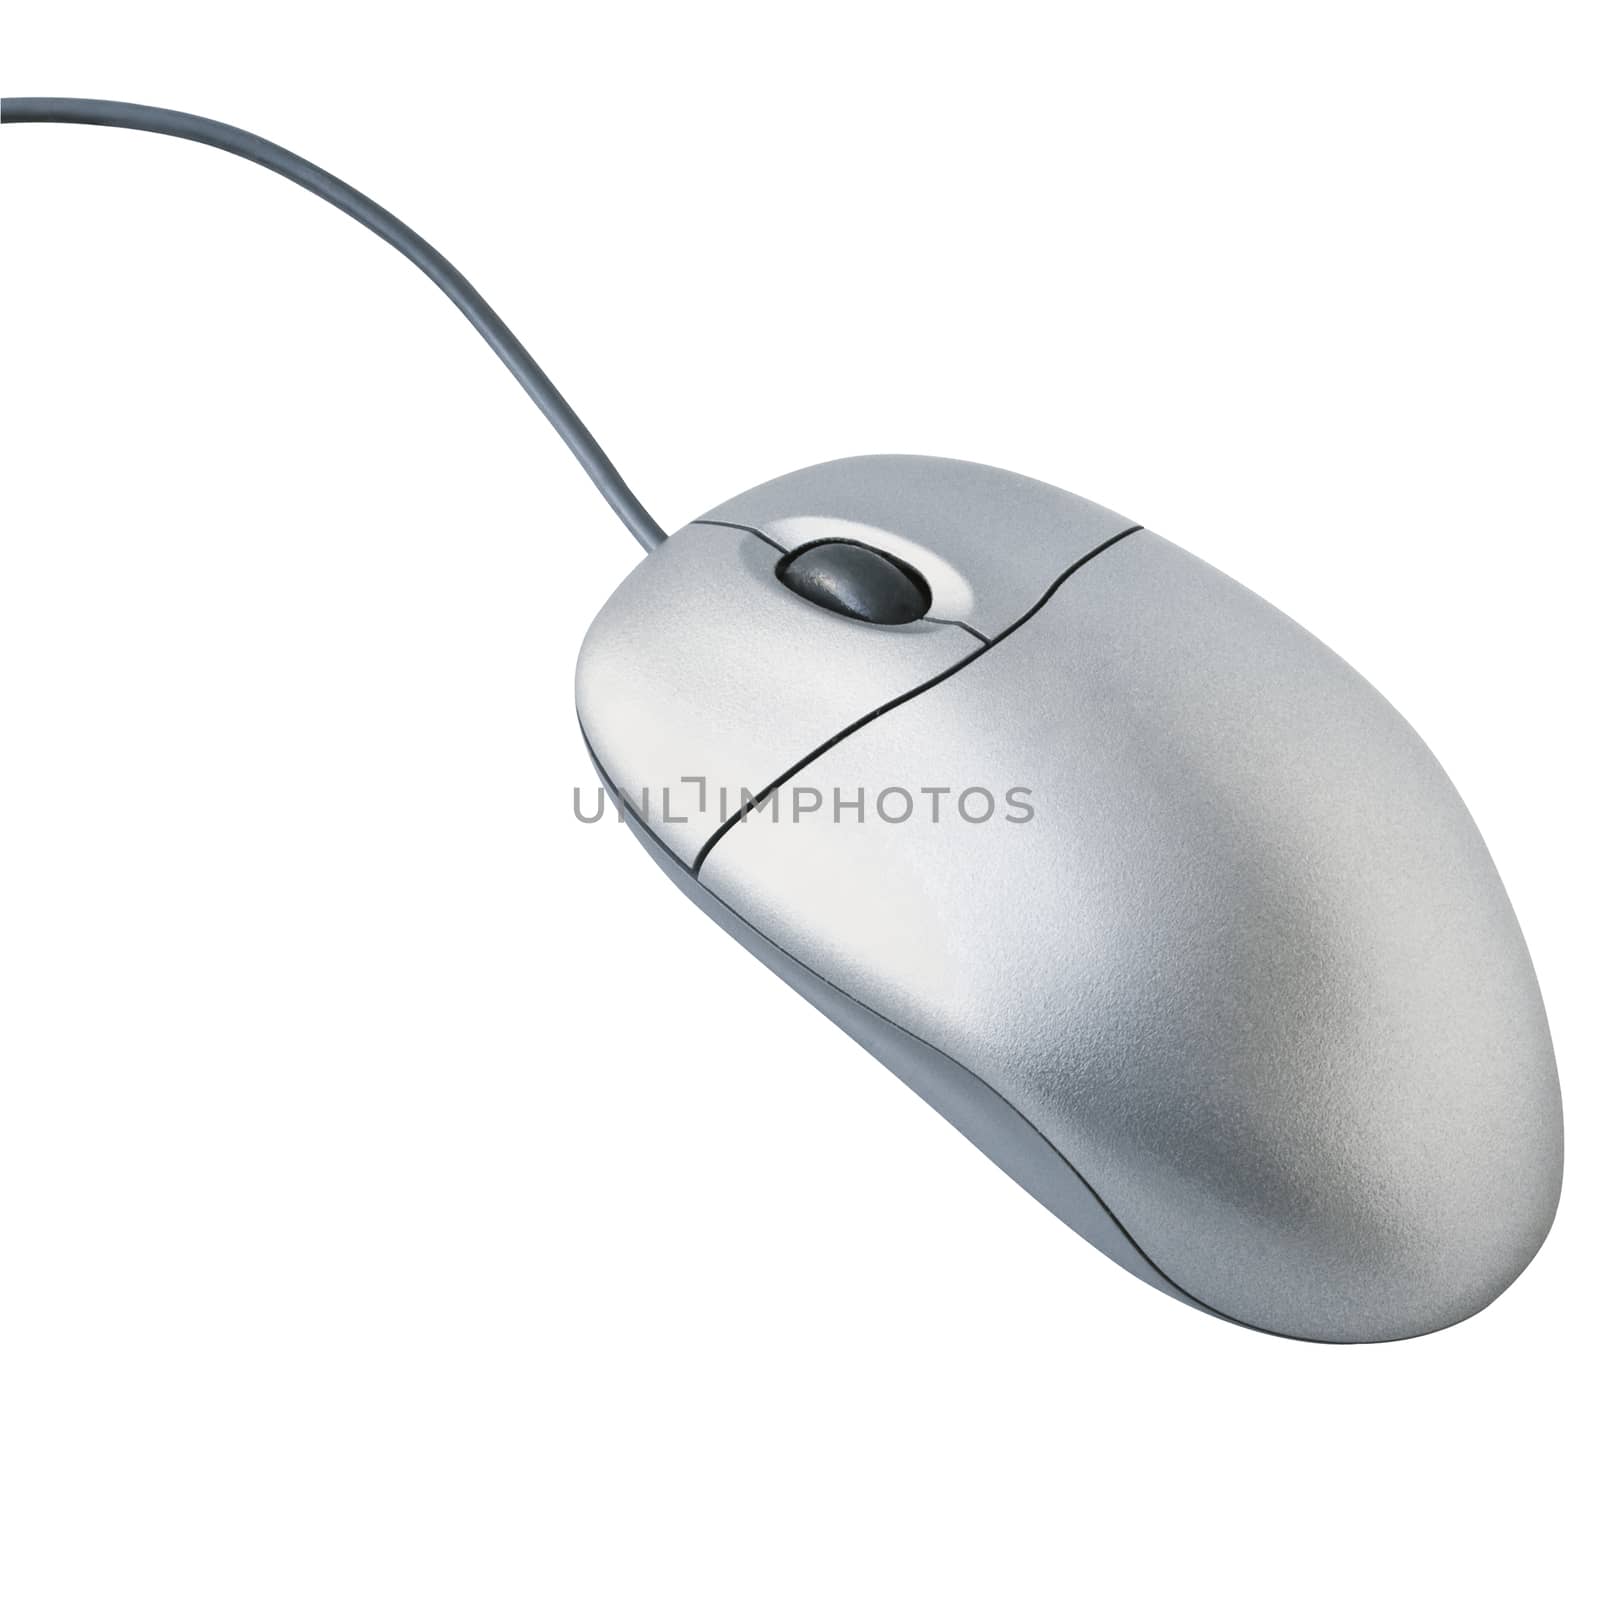 Computer Mouse Input Device With Clipping Path by rcarner